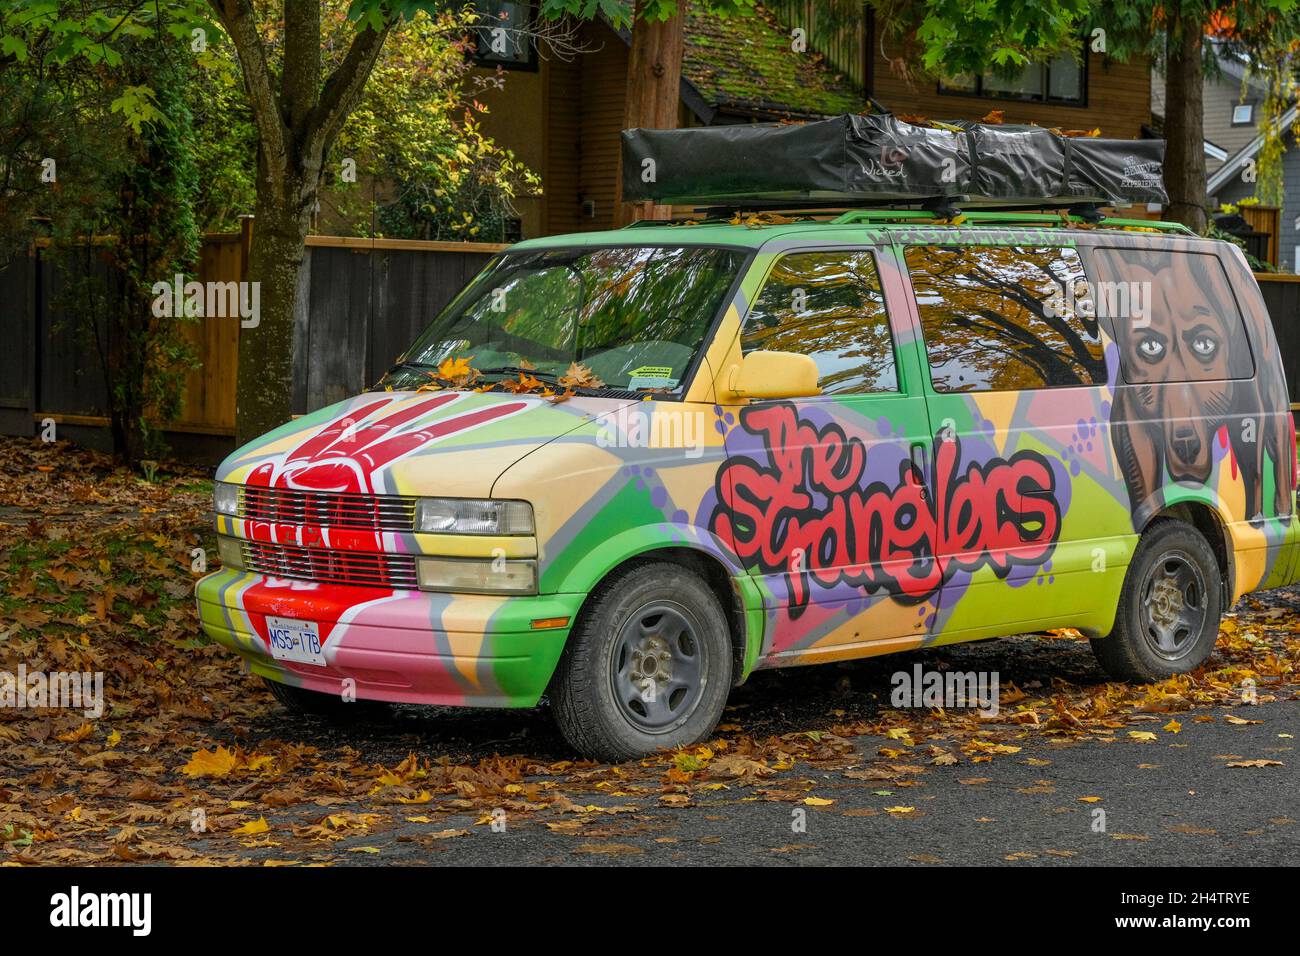 Painted van with homage to punk rock group the Stranglers Stock Photo -  Alamy